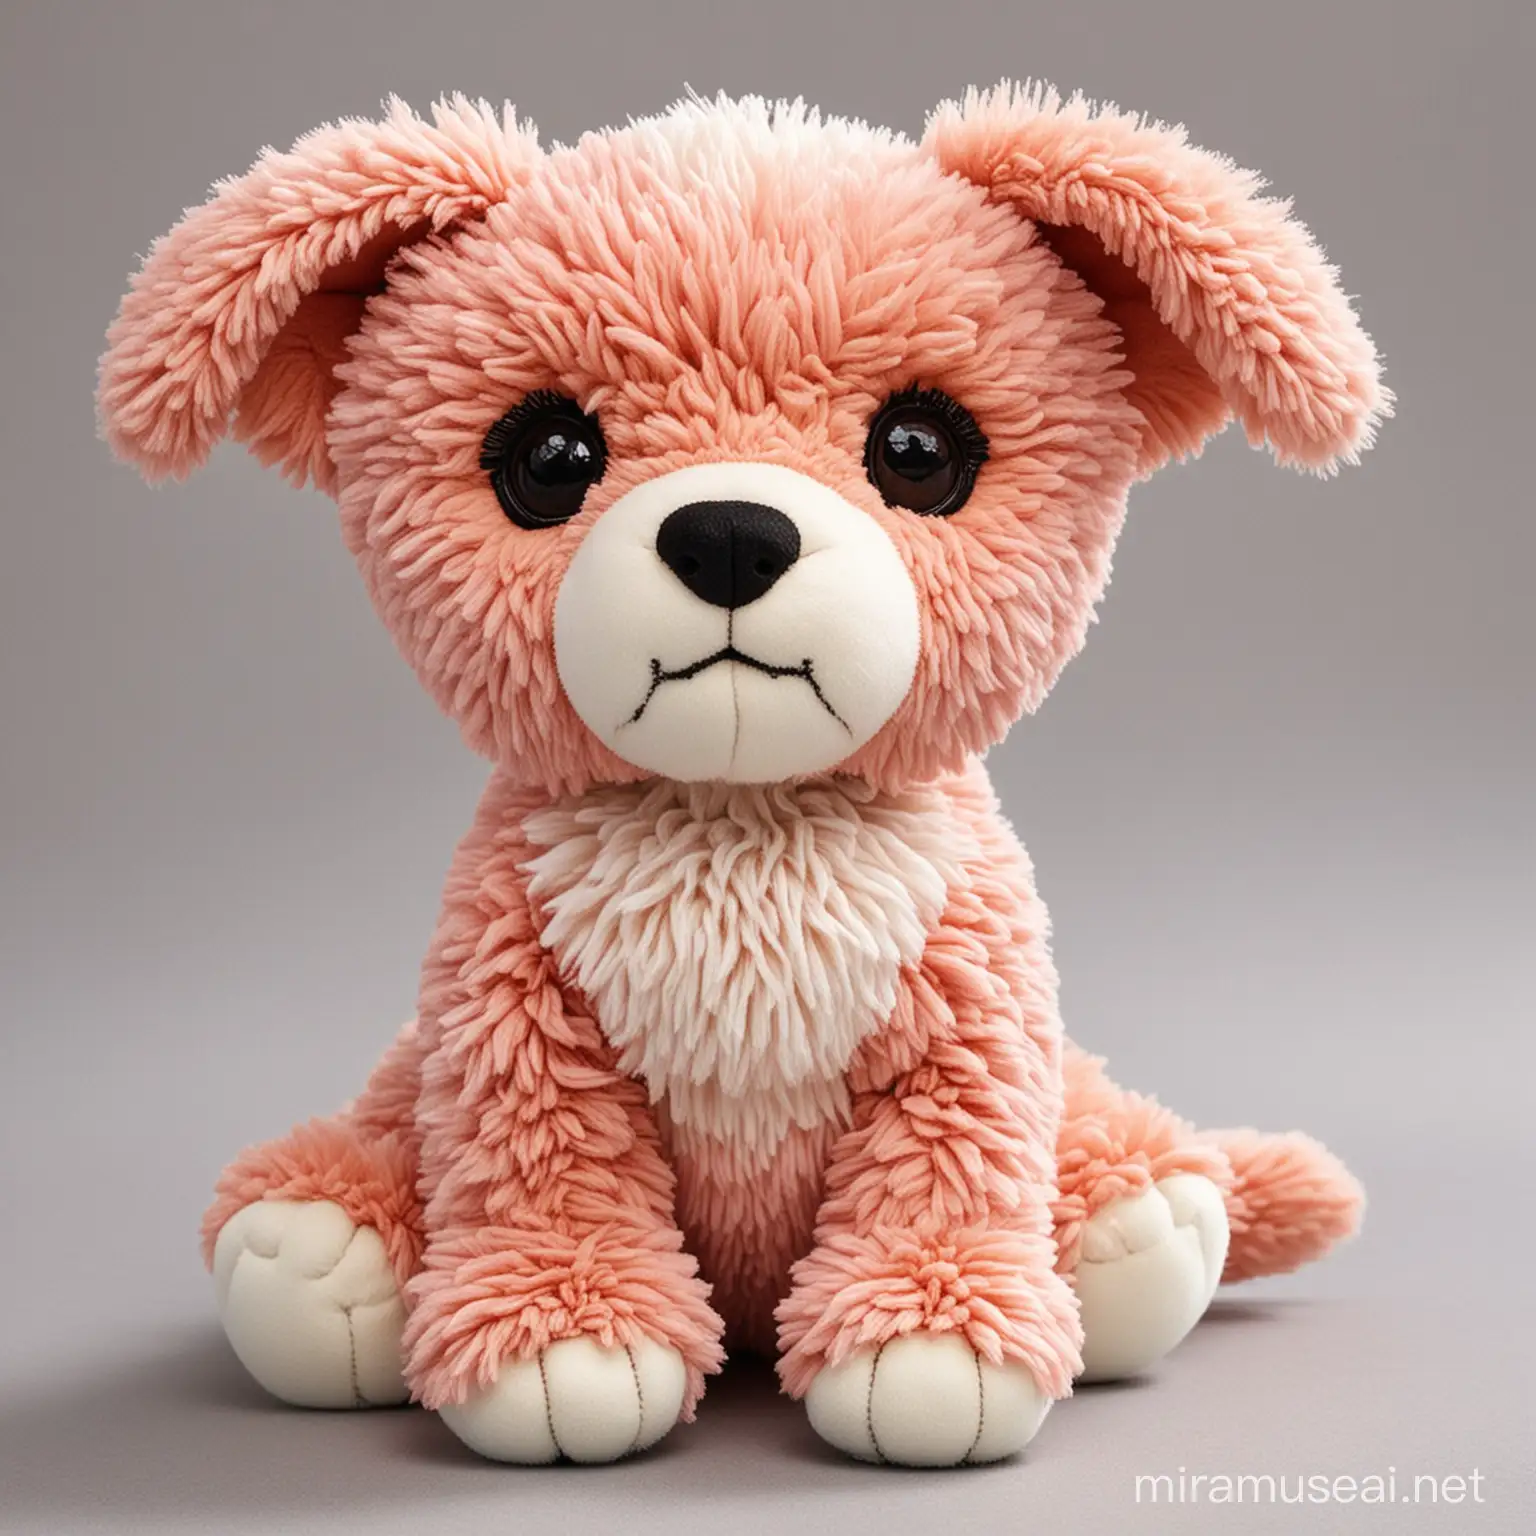 I'm looking for a skilled professional who can transform a picture into a , small-sized dog stuffed animal, capturing the distinctive color pattern, physical characteristics, and unique accessories.  * Design: The final product should accurately portray the picture provided in terms of color, specific physical attributes and accessories. * Size: I want the toy to be small, less than 10 inches.  Required Skills and Experience:  * Deep understanding of fabric and color * Excellent attention to detail * Experience creating customized stuffed animals * Ability to accurately mimic physical traits in fabric form